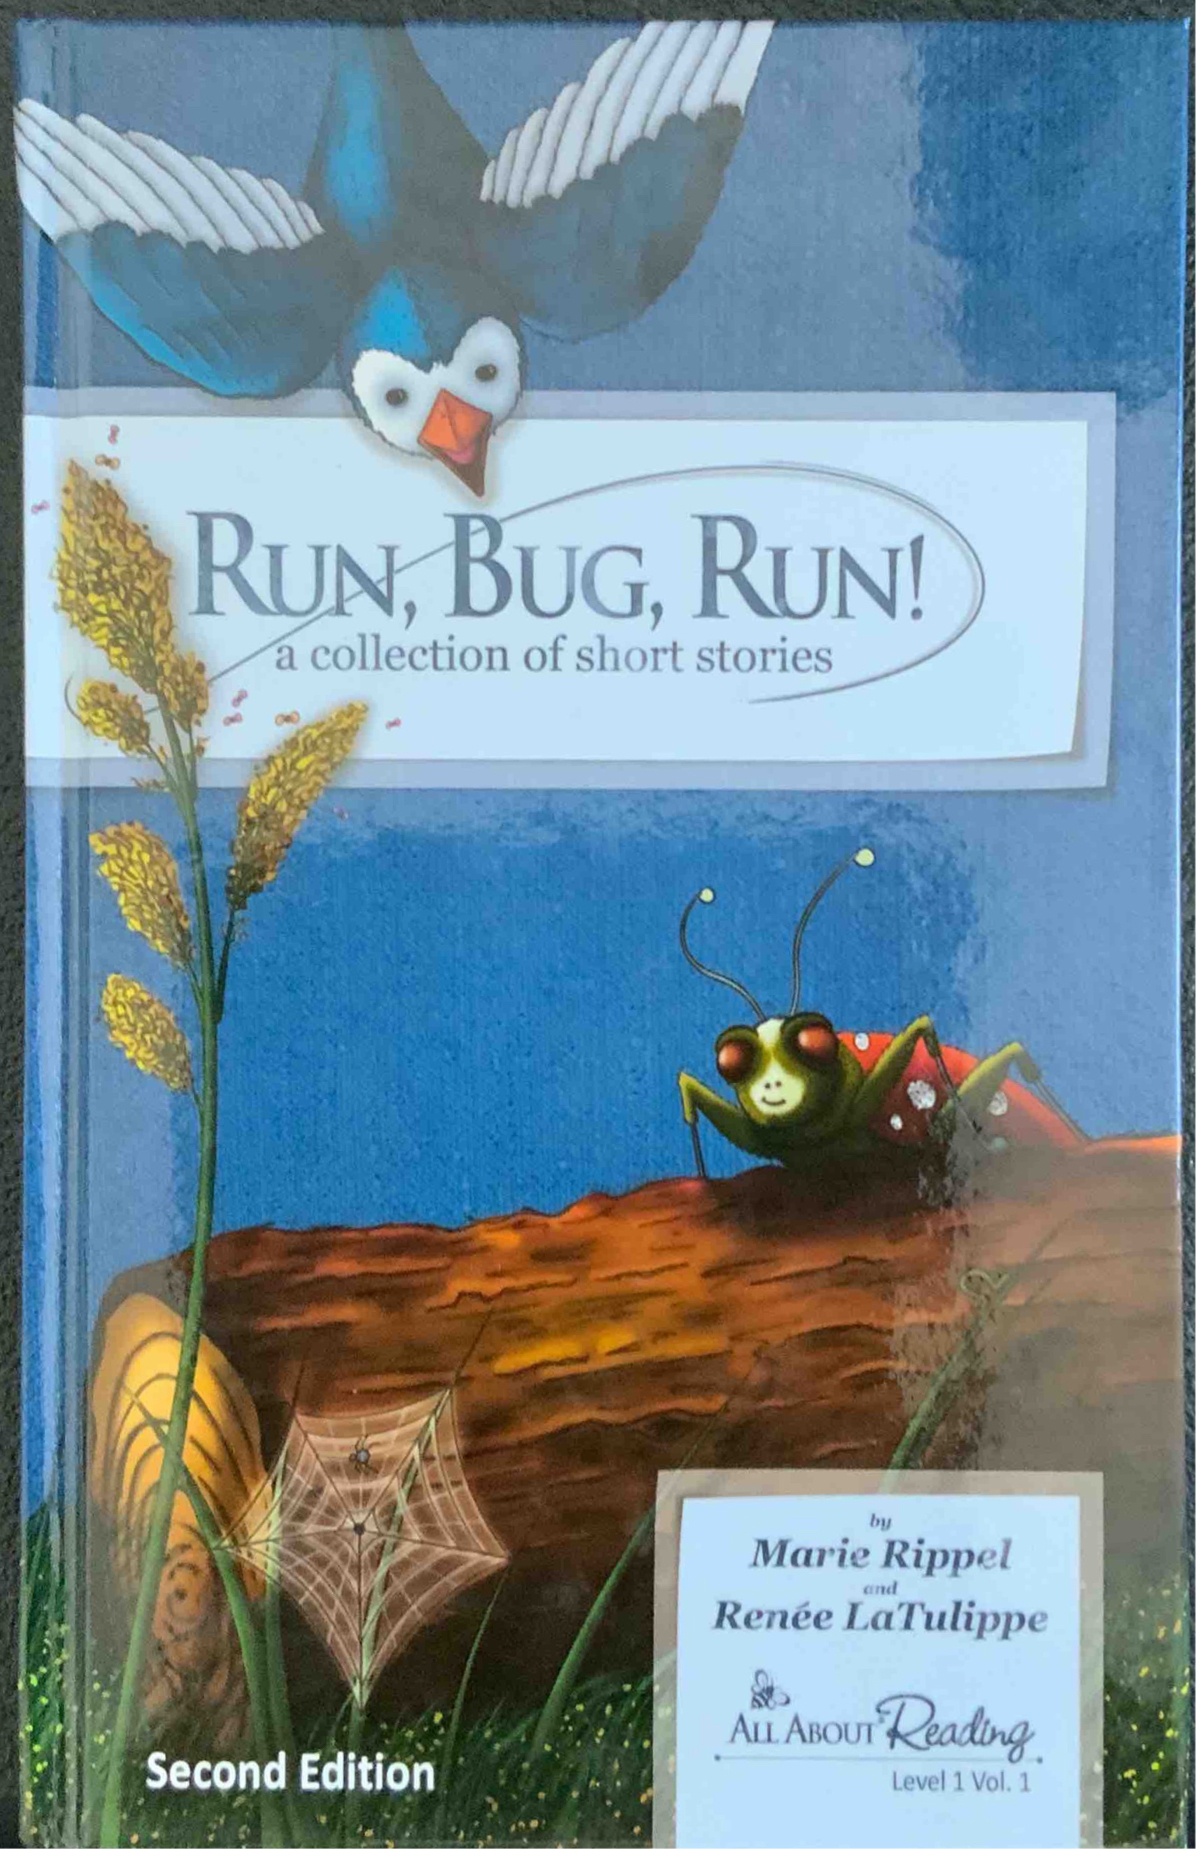 All About Reading- Run, Bug, Run!: Level1 Vol.1-  A Collection of Short Stories- Color Edition